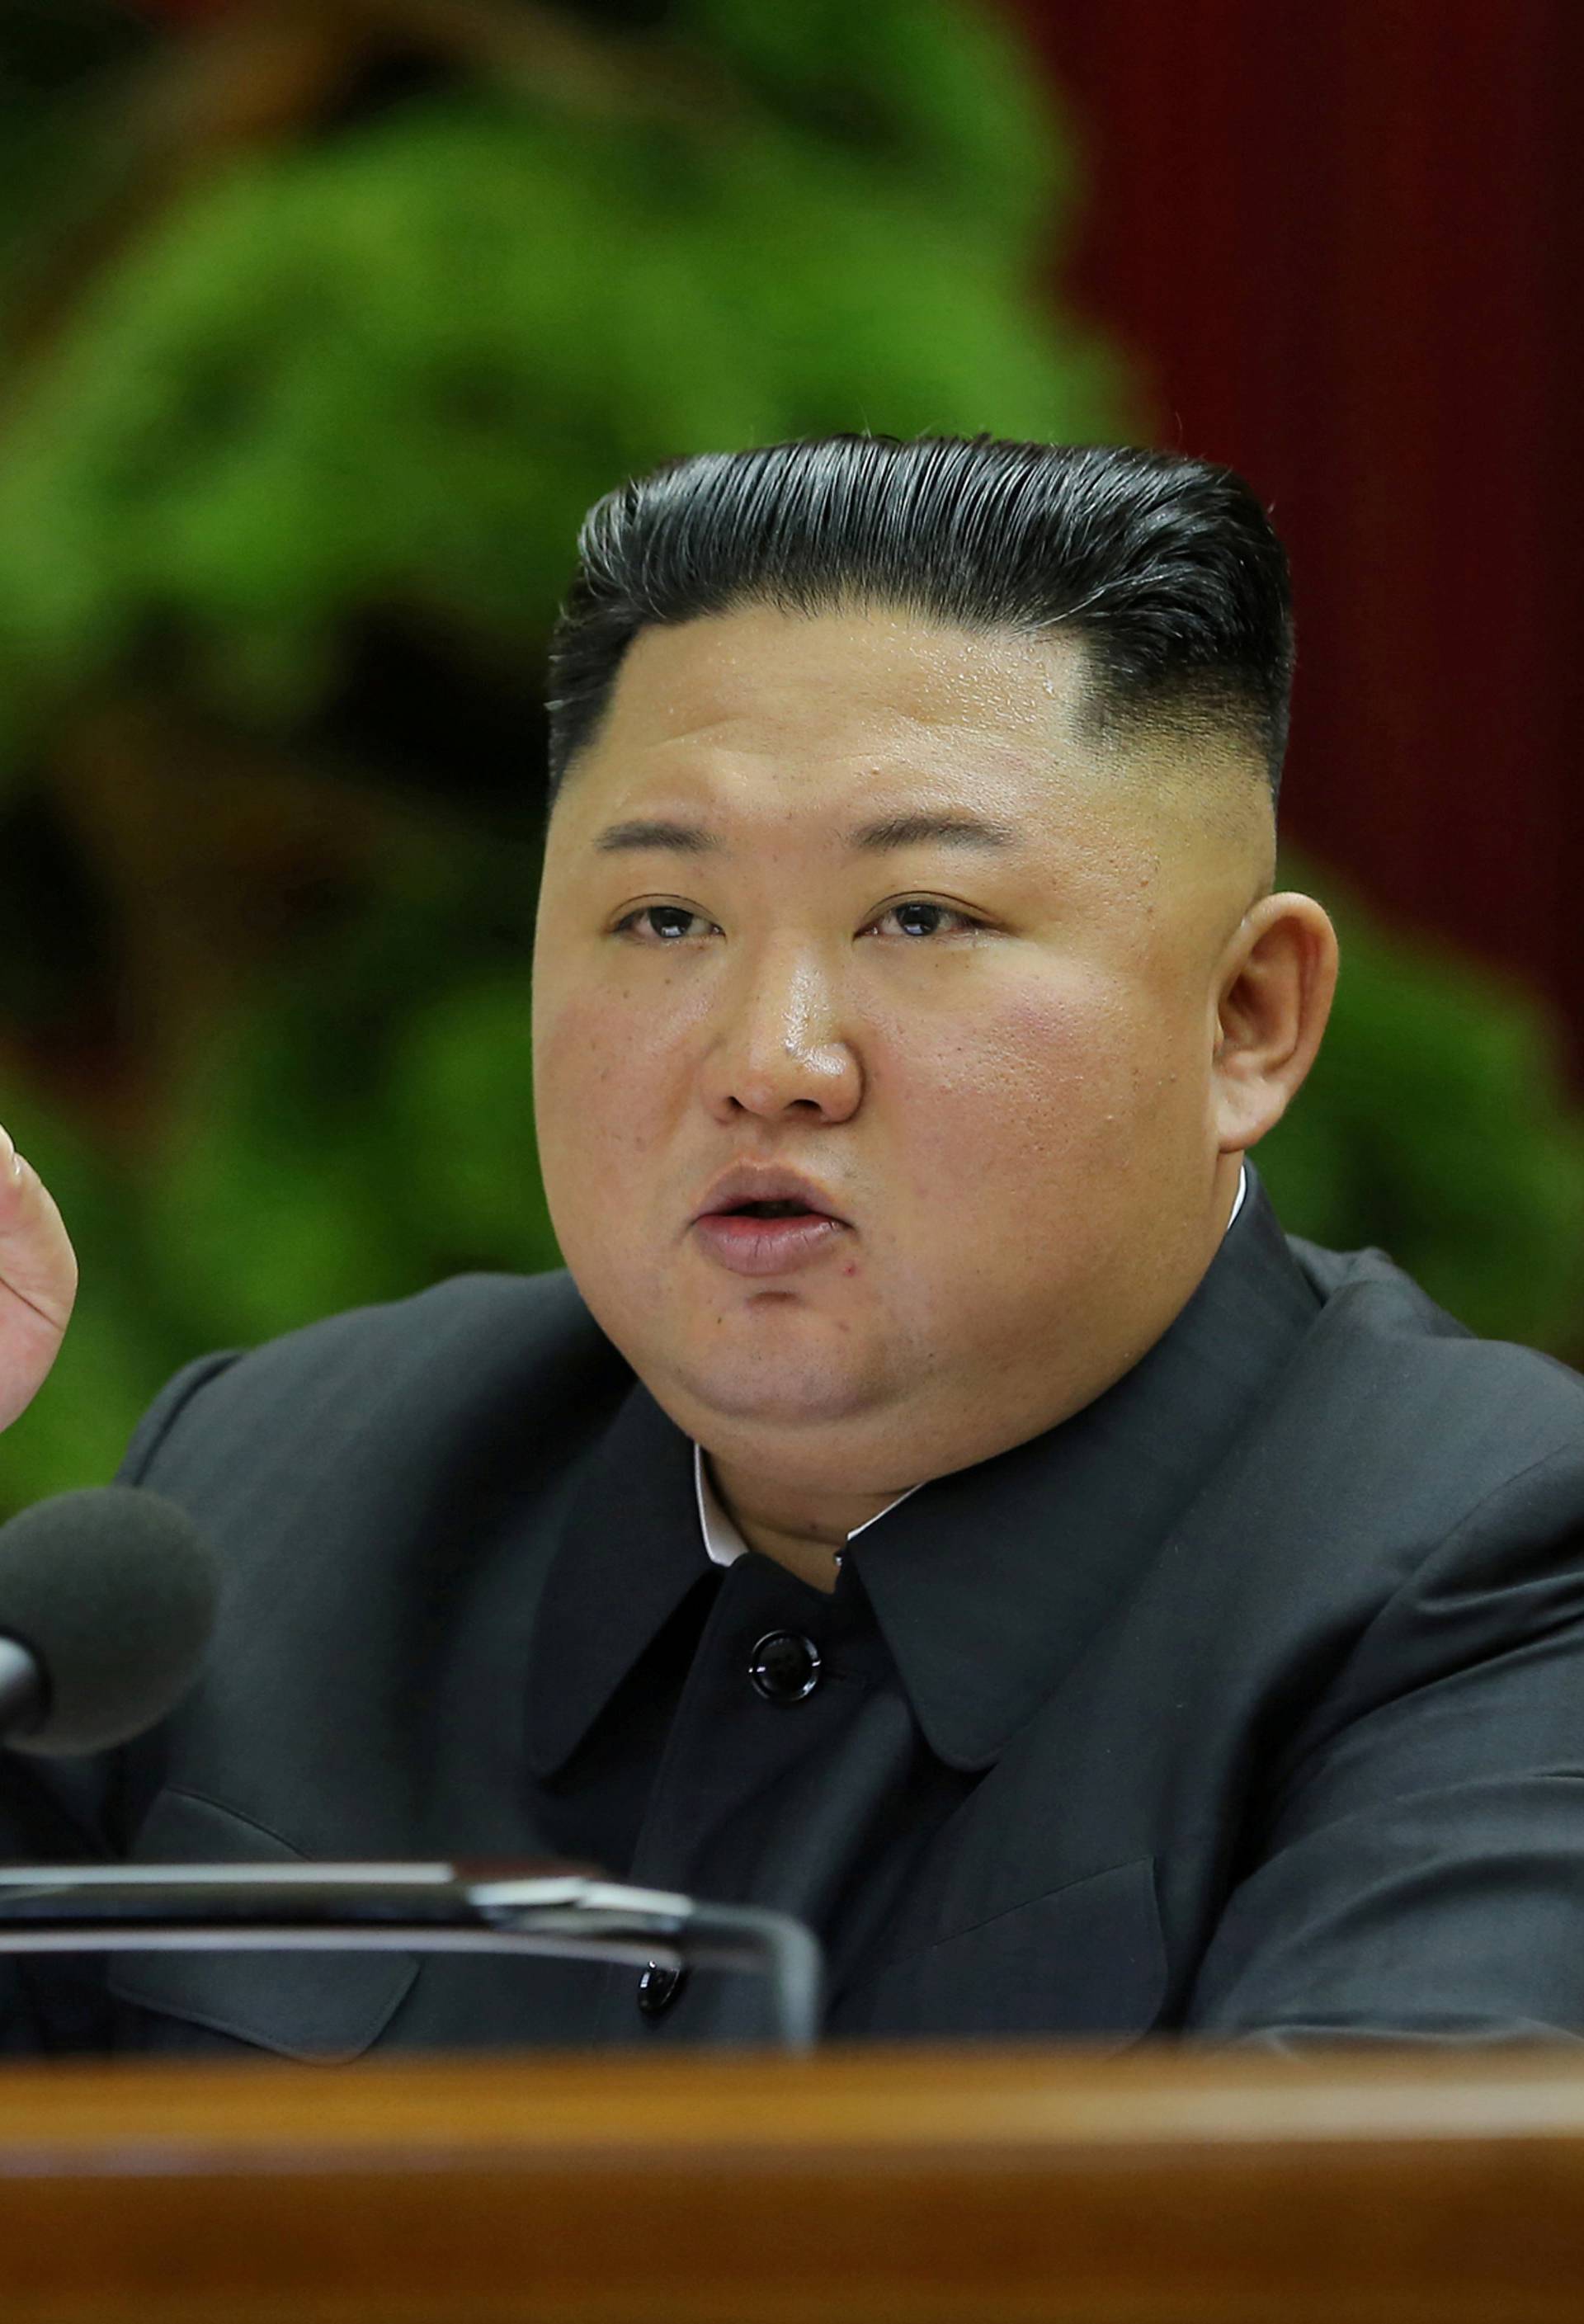 North Korean leader Kim Jong Un speaks during the 5th Plenary Meeting of the 7th Central Committee of the Workers' Party of Korea